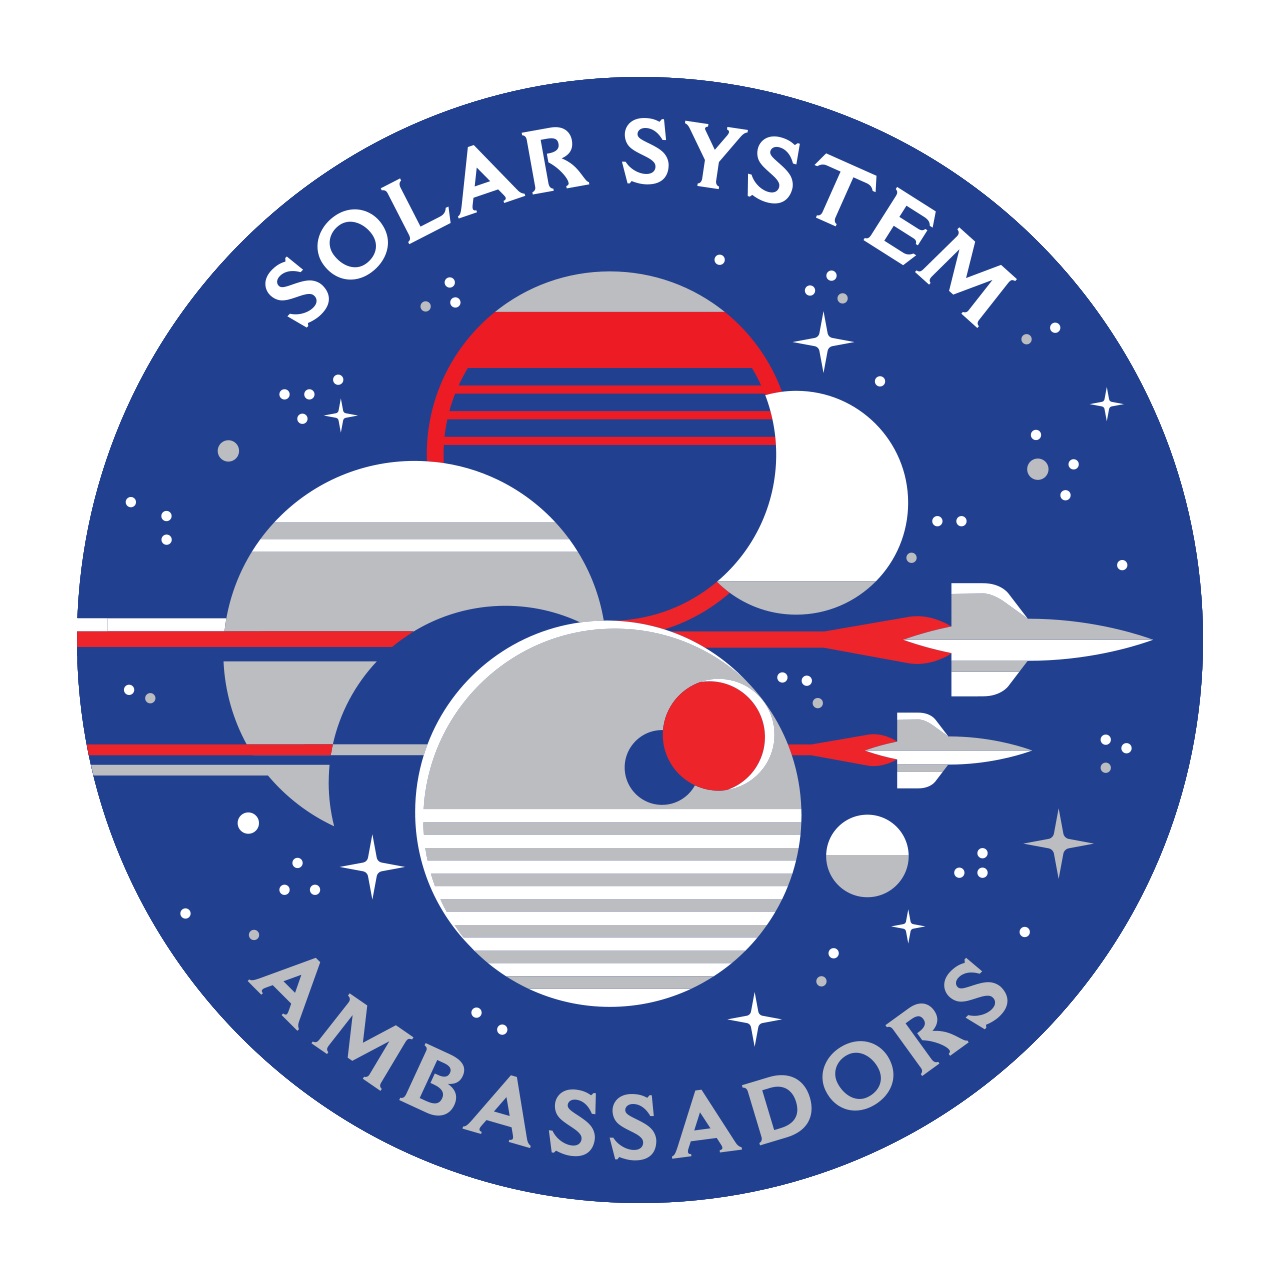 Solar System Ambassadors logo in blue and red with abstract planets and jets flying left to right